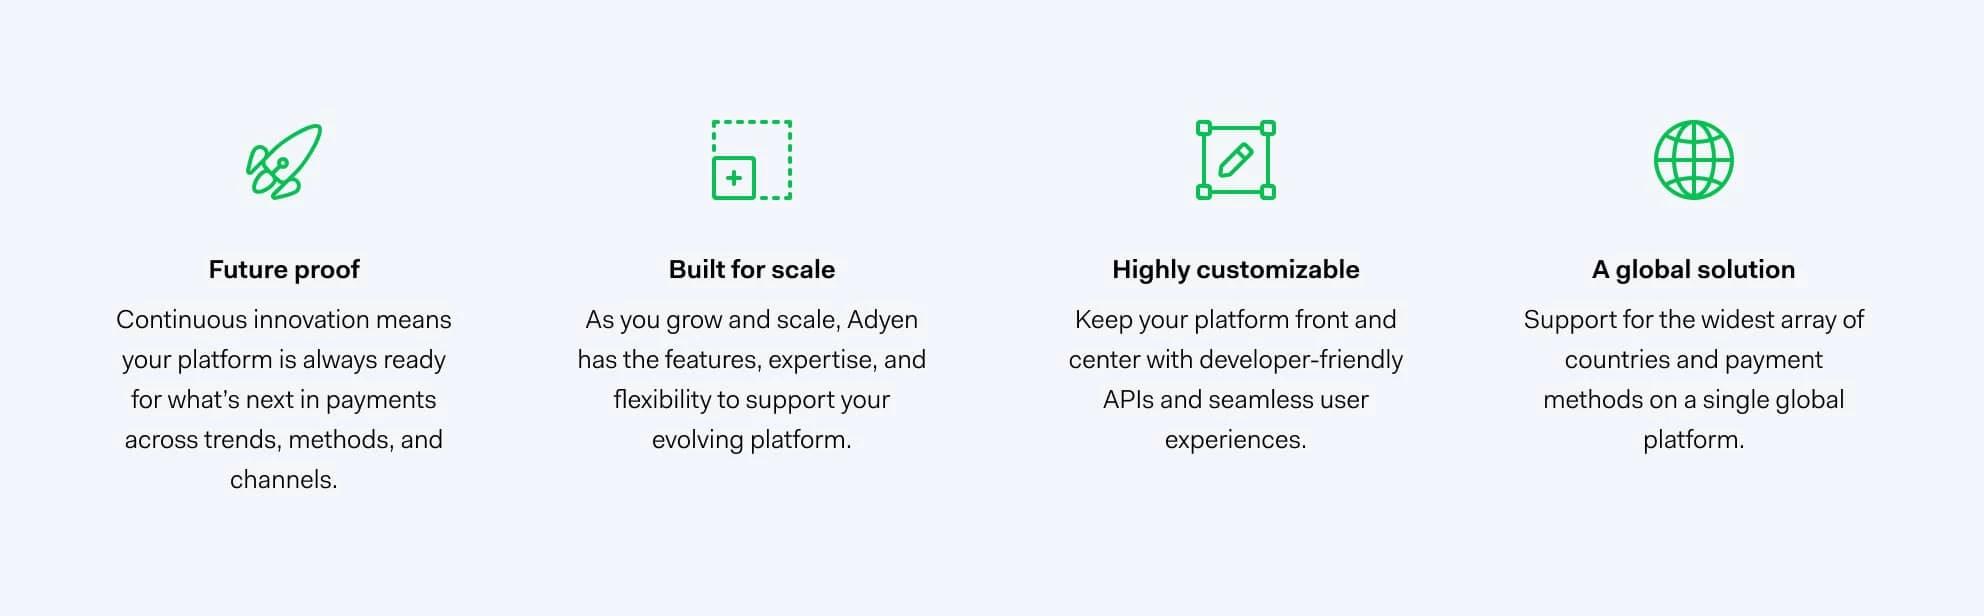 Reasons to chose Adyen for platform payments